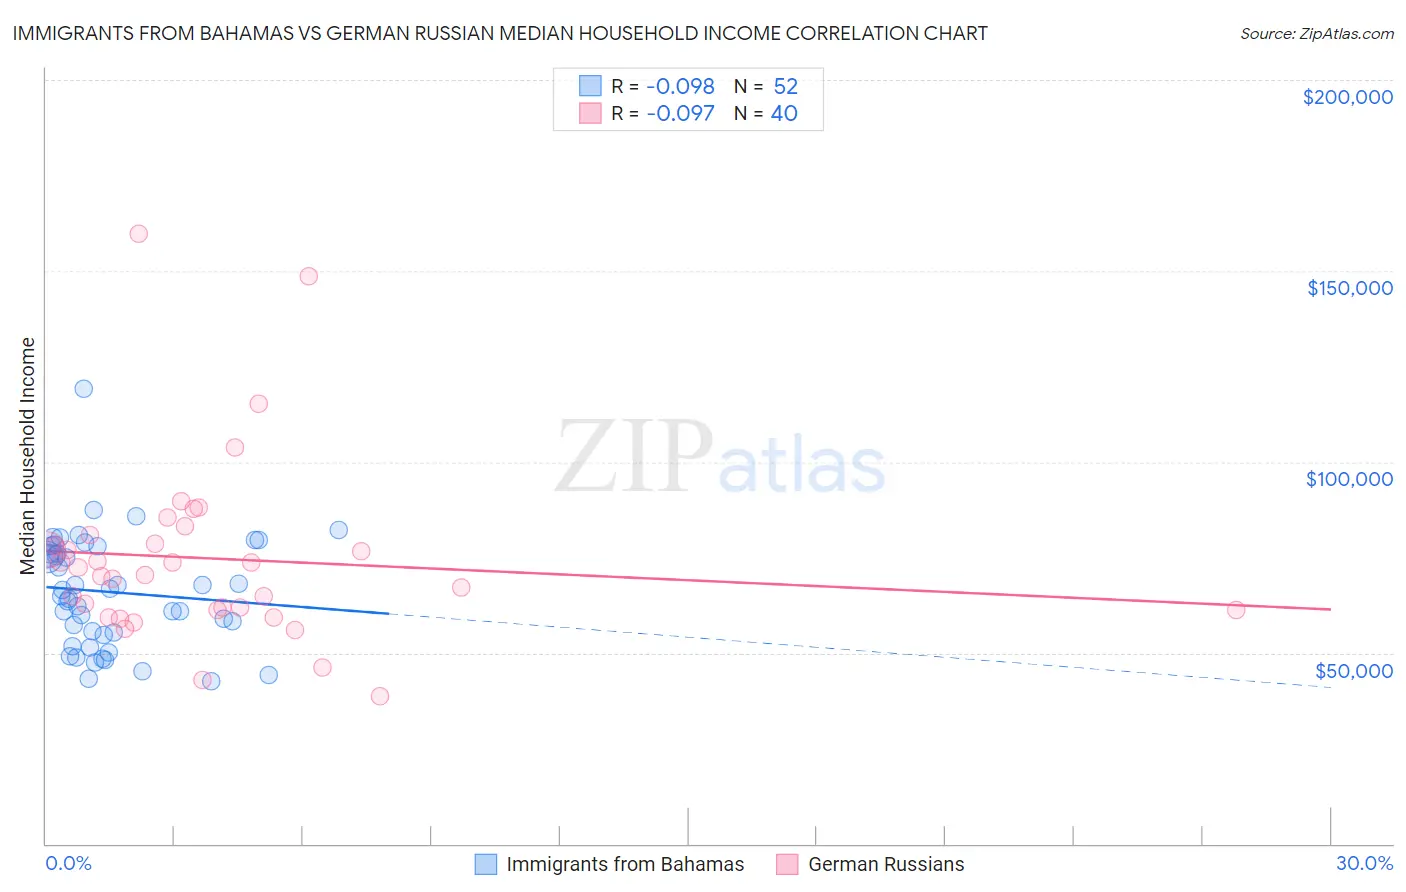 Immigrants from Bahamas vs German Russian Median Household Income